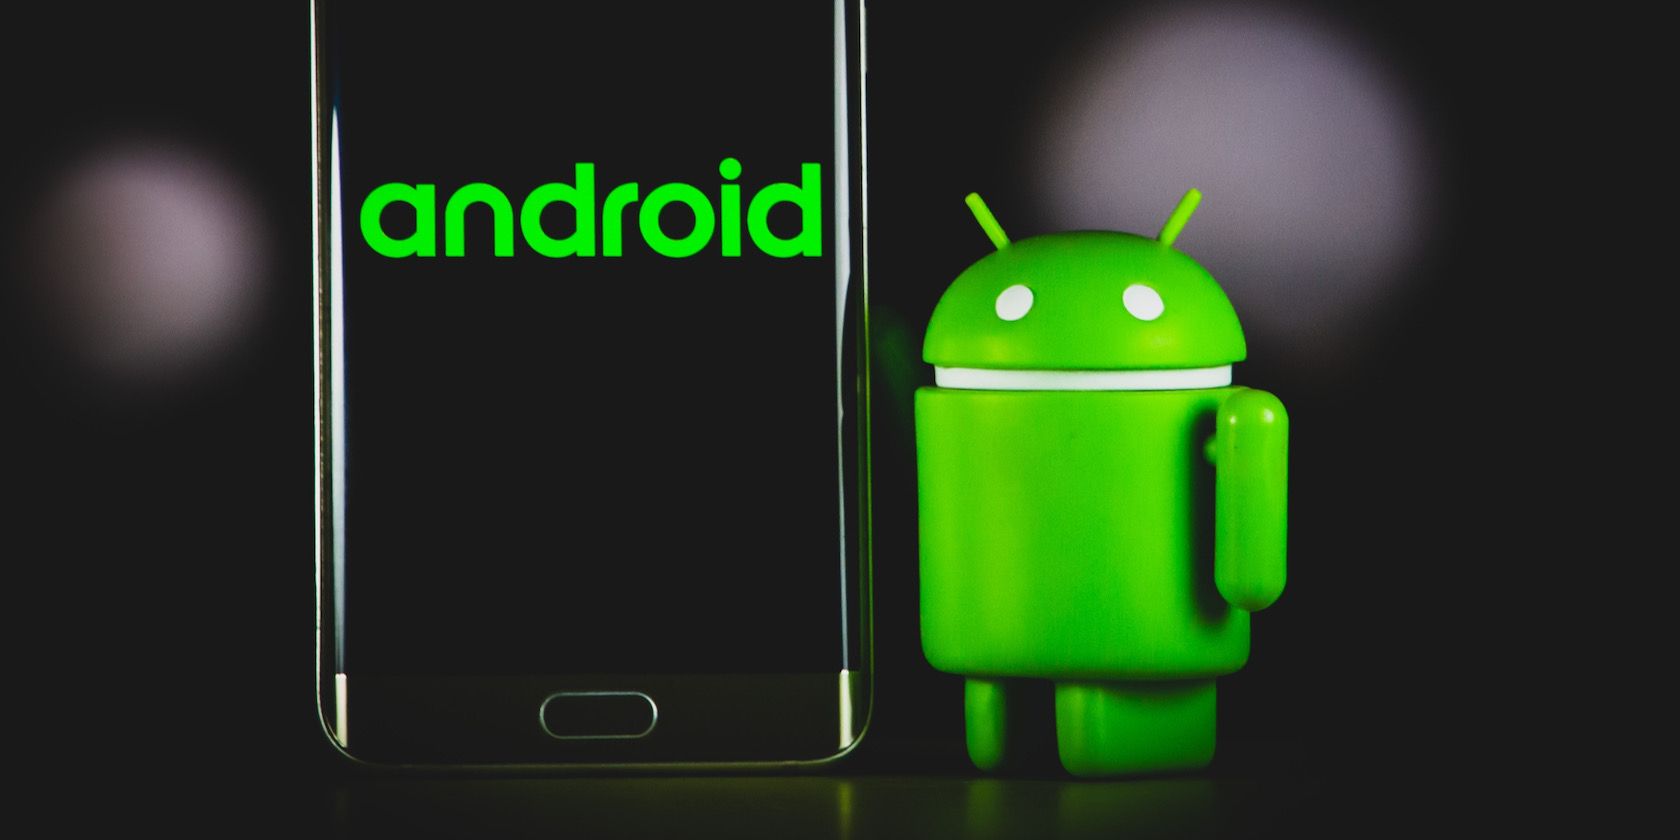 android logo on phone with android logo figure